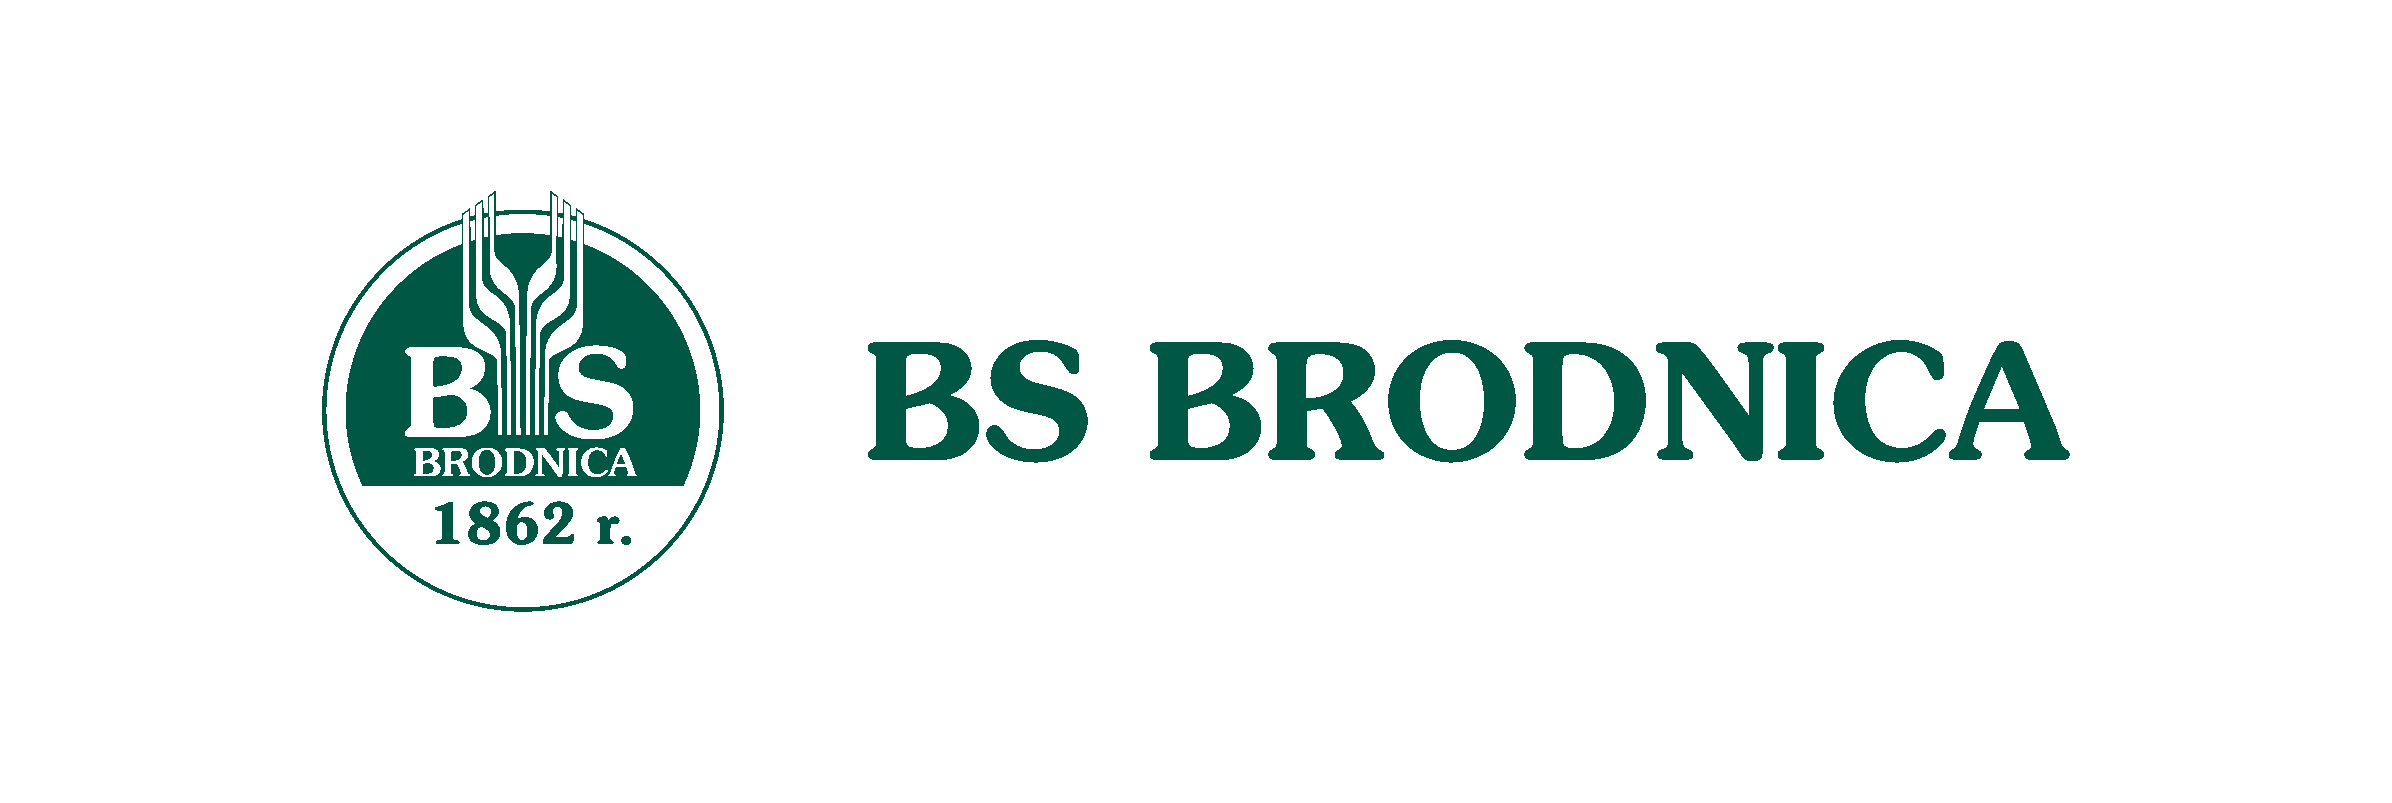 BS Brodnicaのロゴ